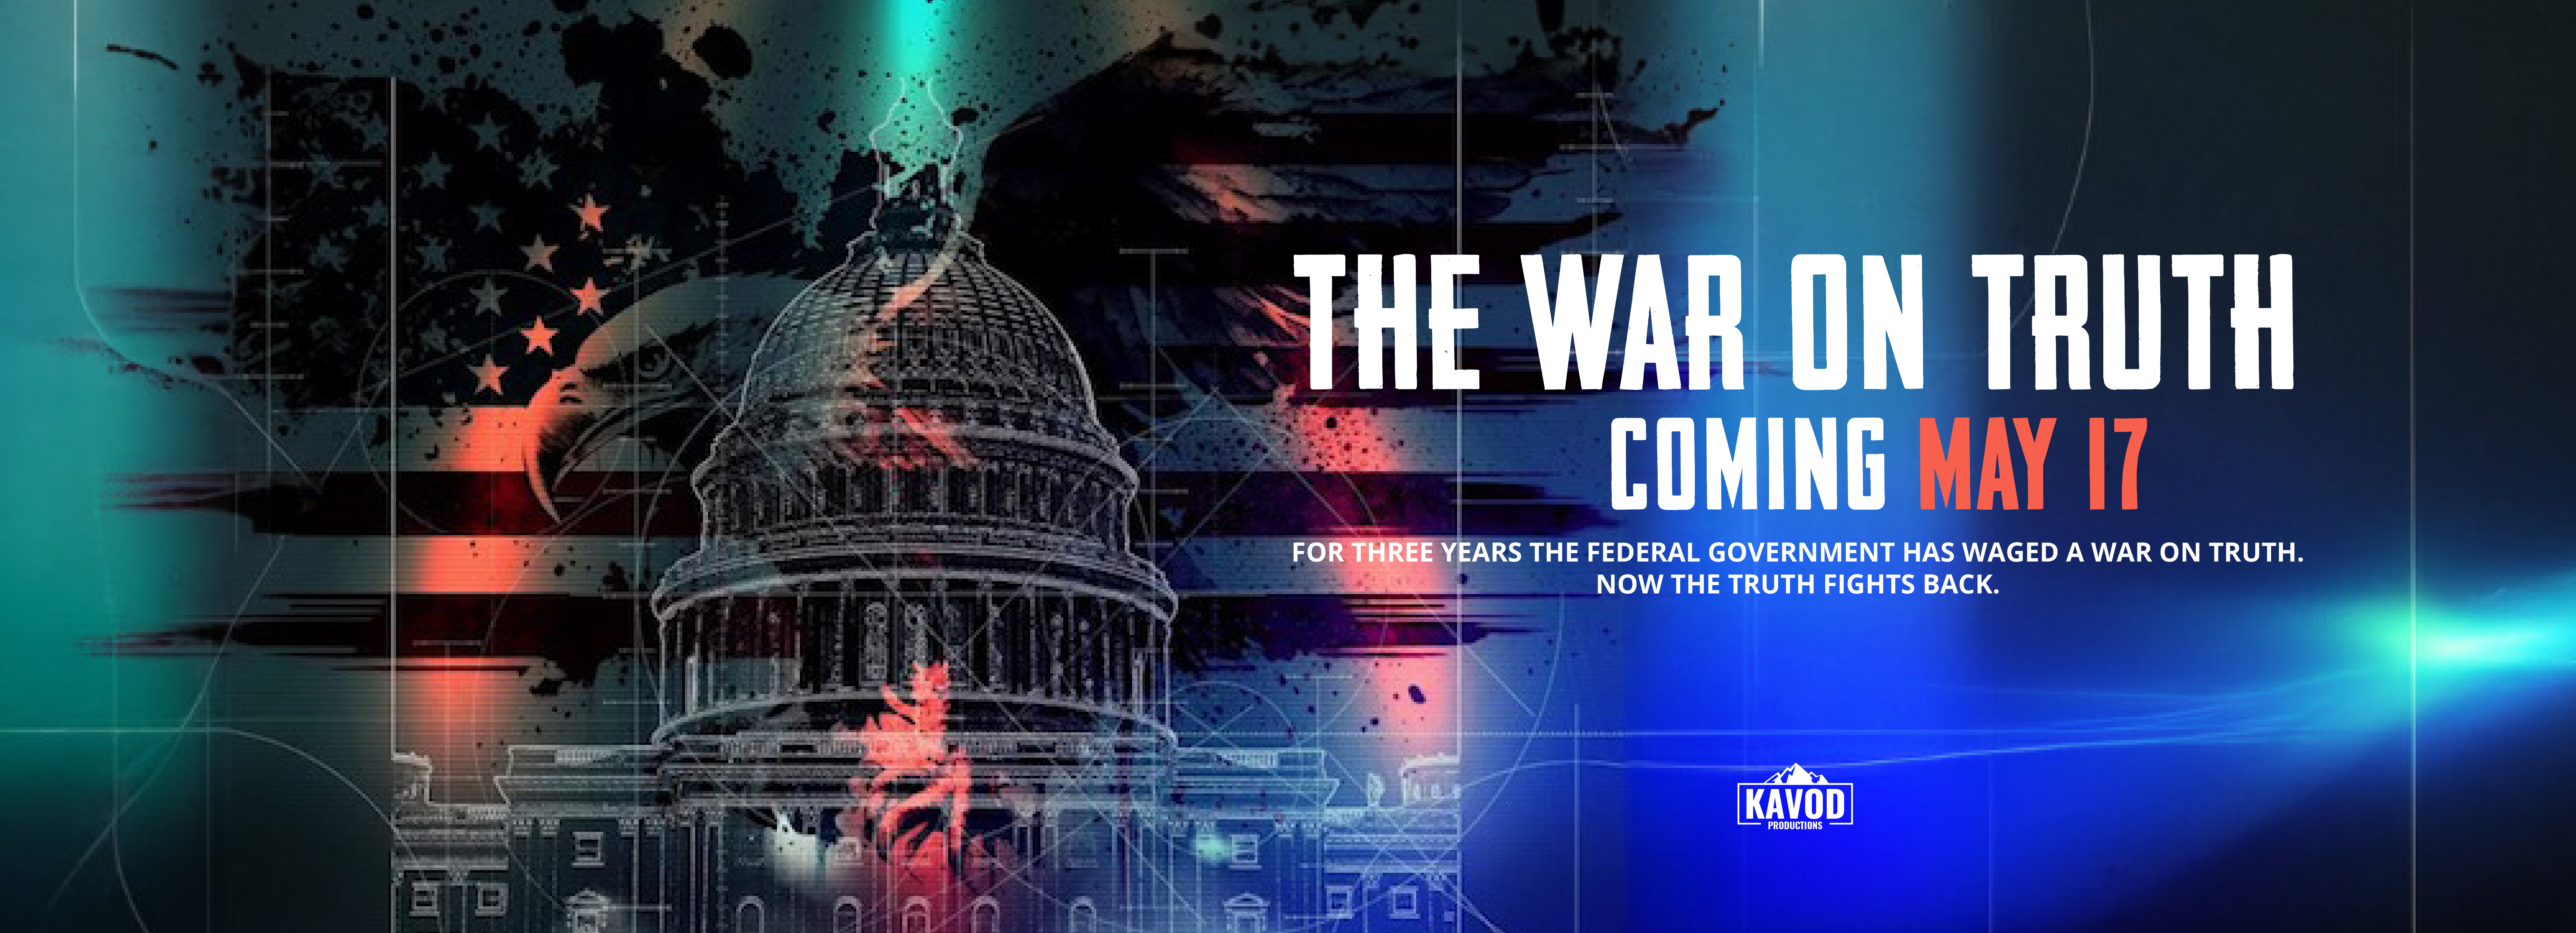 WAR ON TRUTH MOVIE BANNER COVER